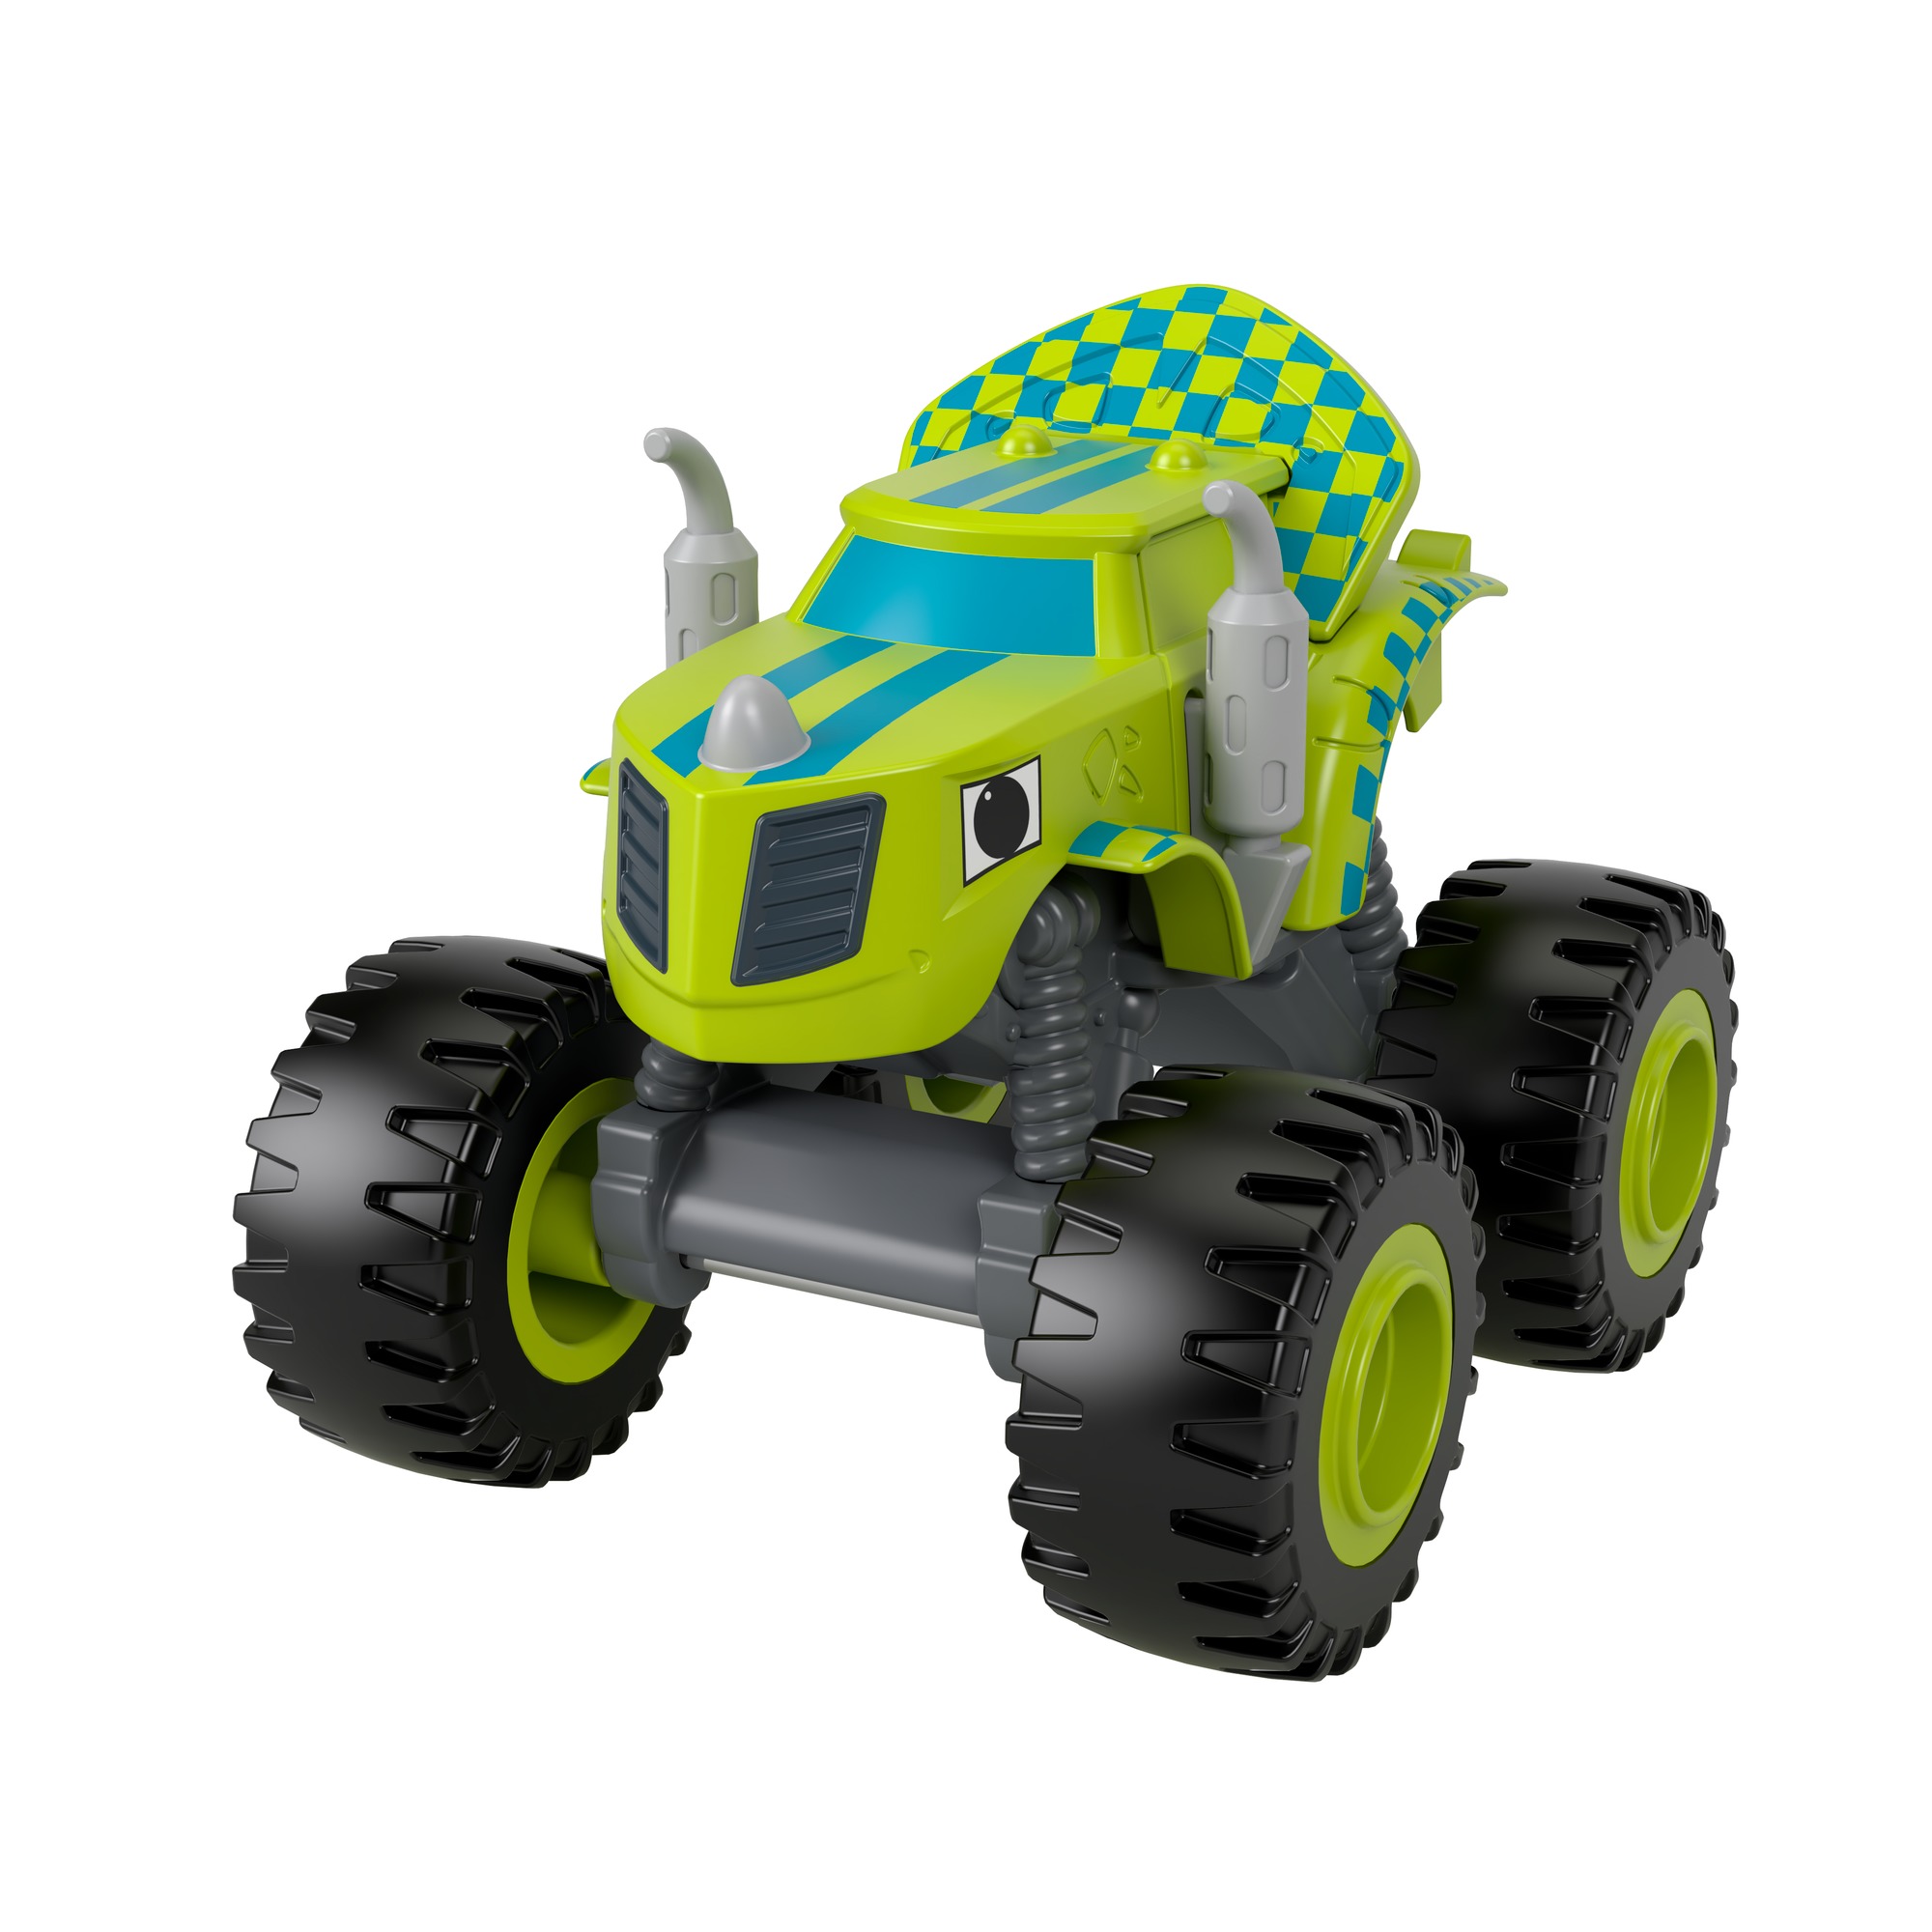 Fisher-Price Blaze & the Monster Machines Diecast Monster Truck Collection, Styles May Vary - image 4 of 6